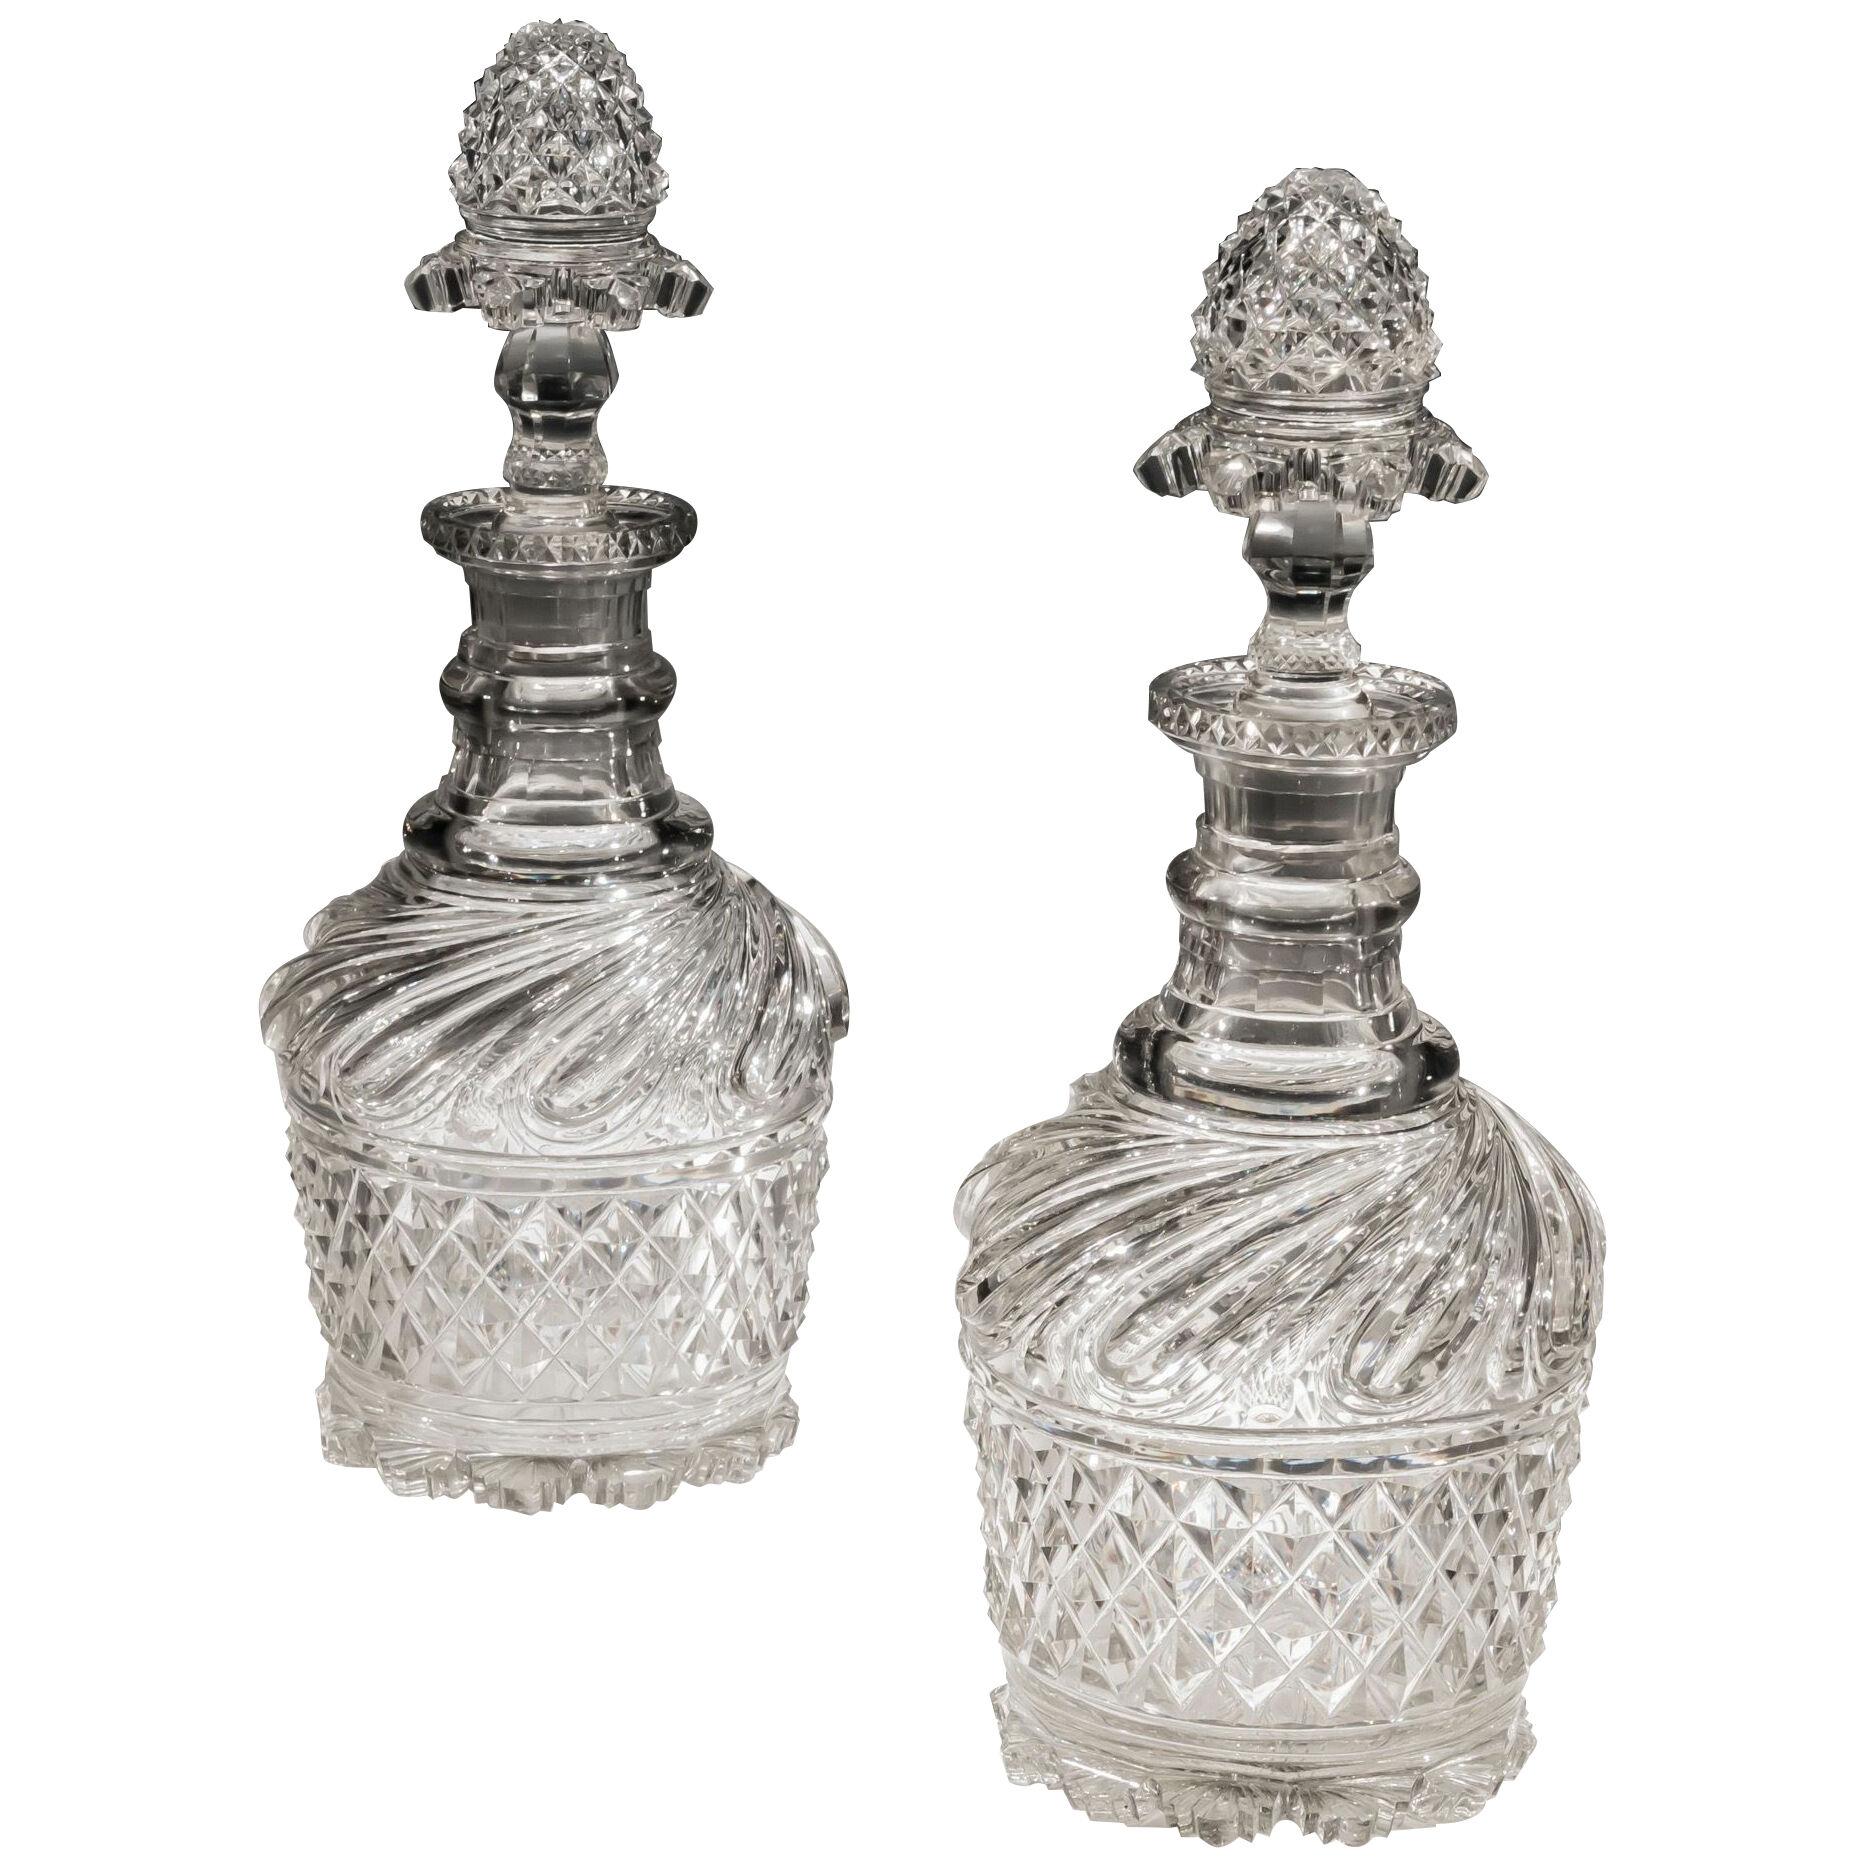 AN EXCEPTIONAL PAIR OF REGENCY CUT GLASS DECANTERS BY PERRIN GEDDES